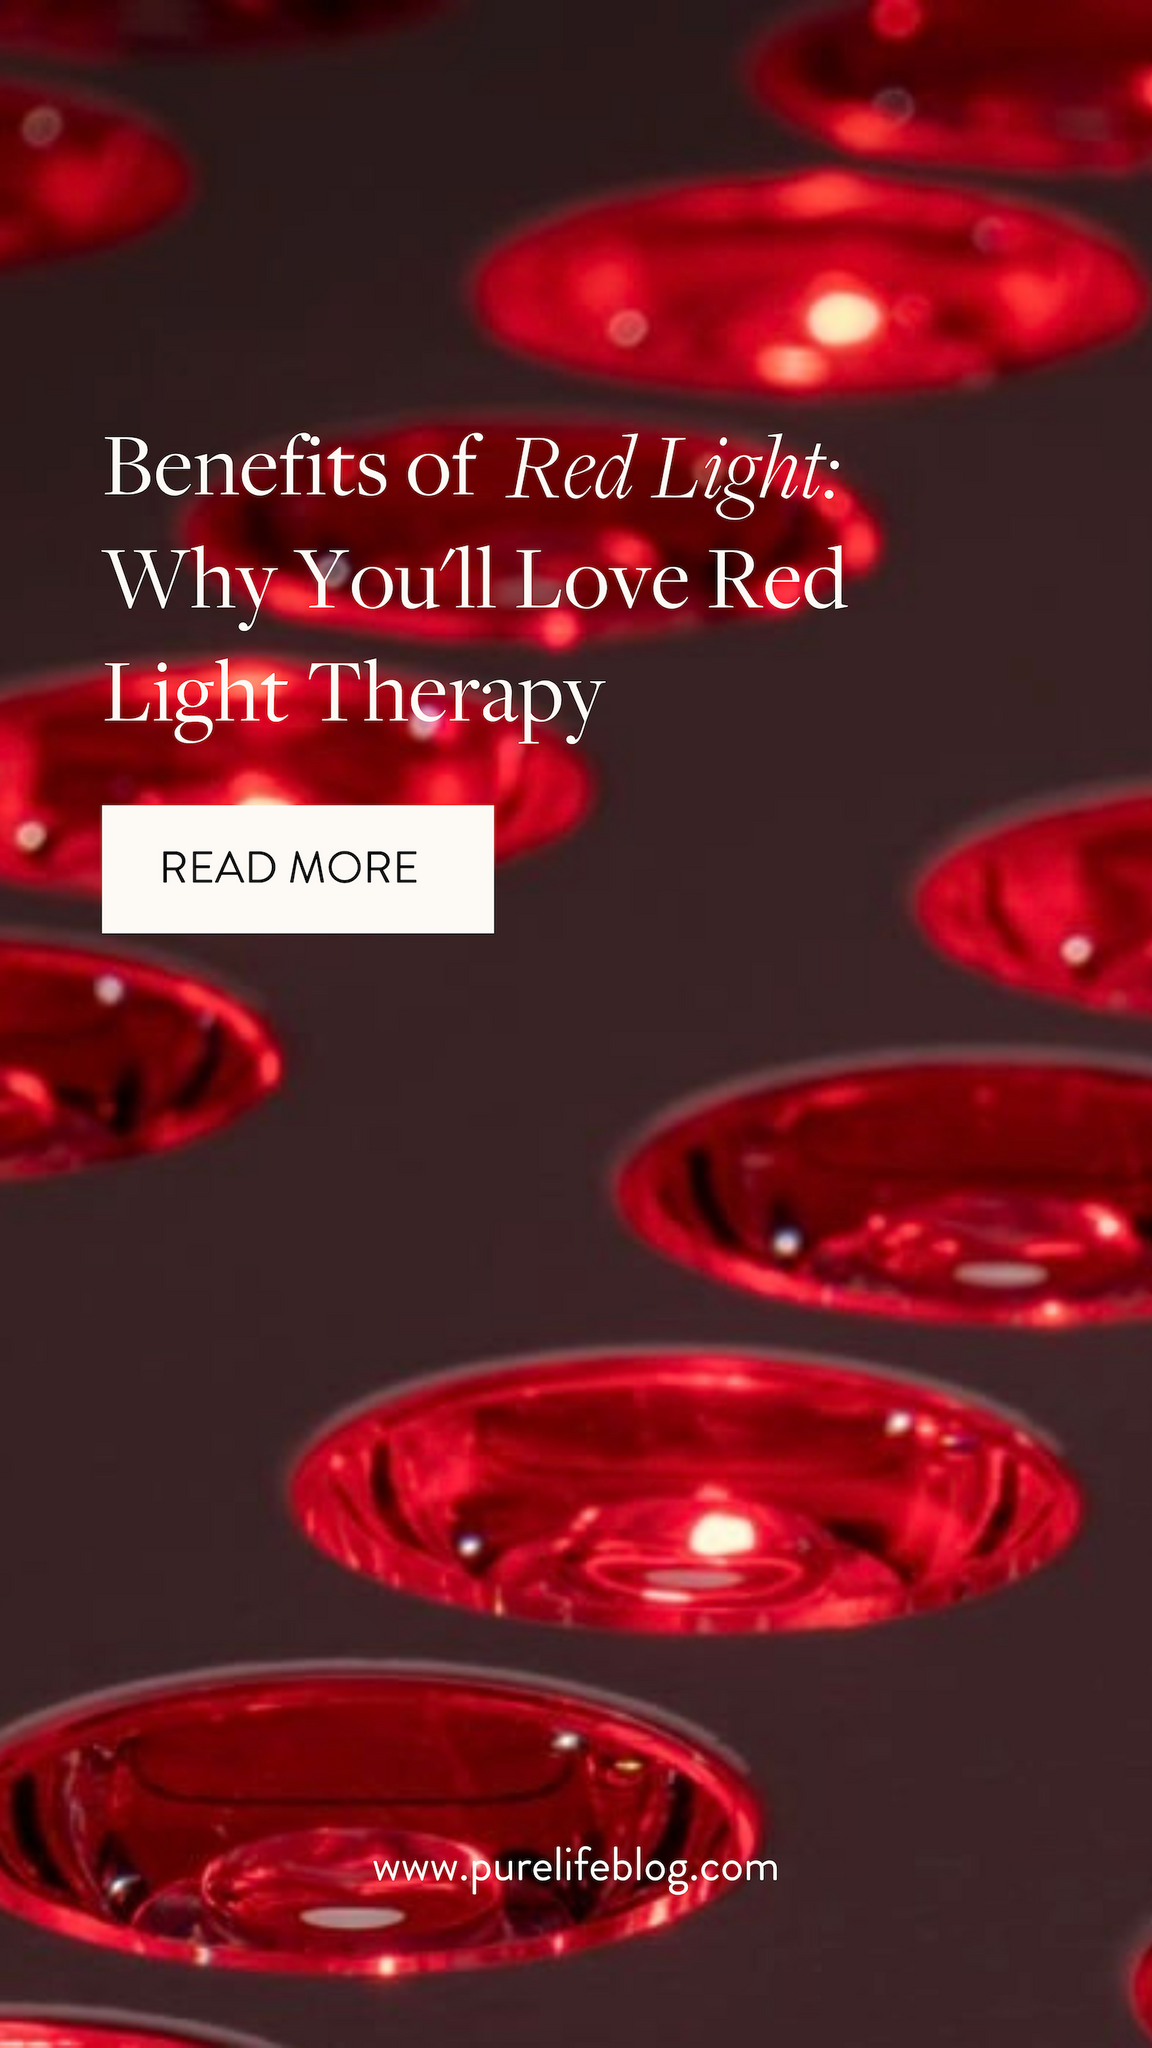 Looking for a gentle, non-invasive therapy? From skin-healing powers to inflammation squashing and pain relief – red light is sweeping the holistic health world. | Primally Pure Skincare